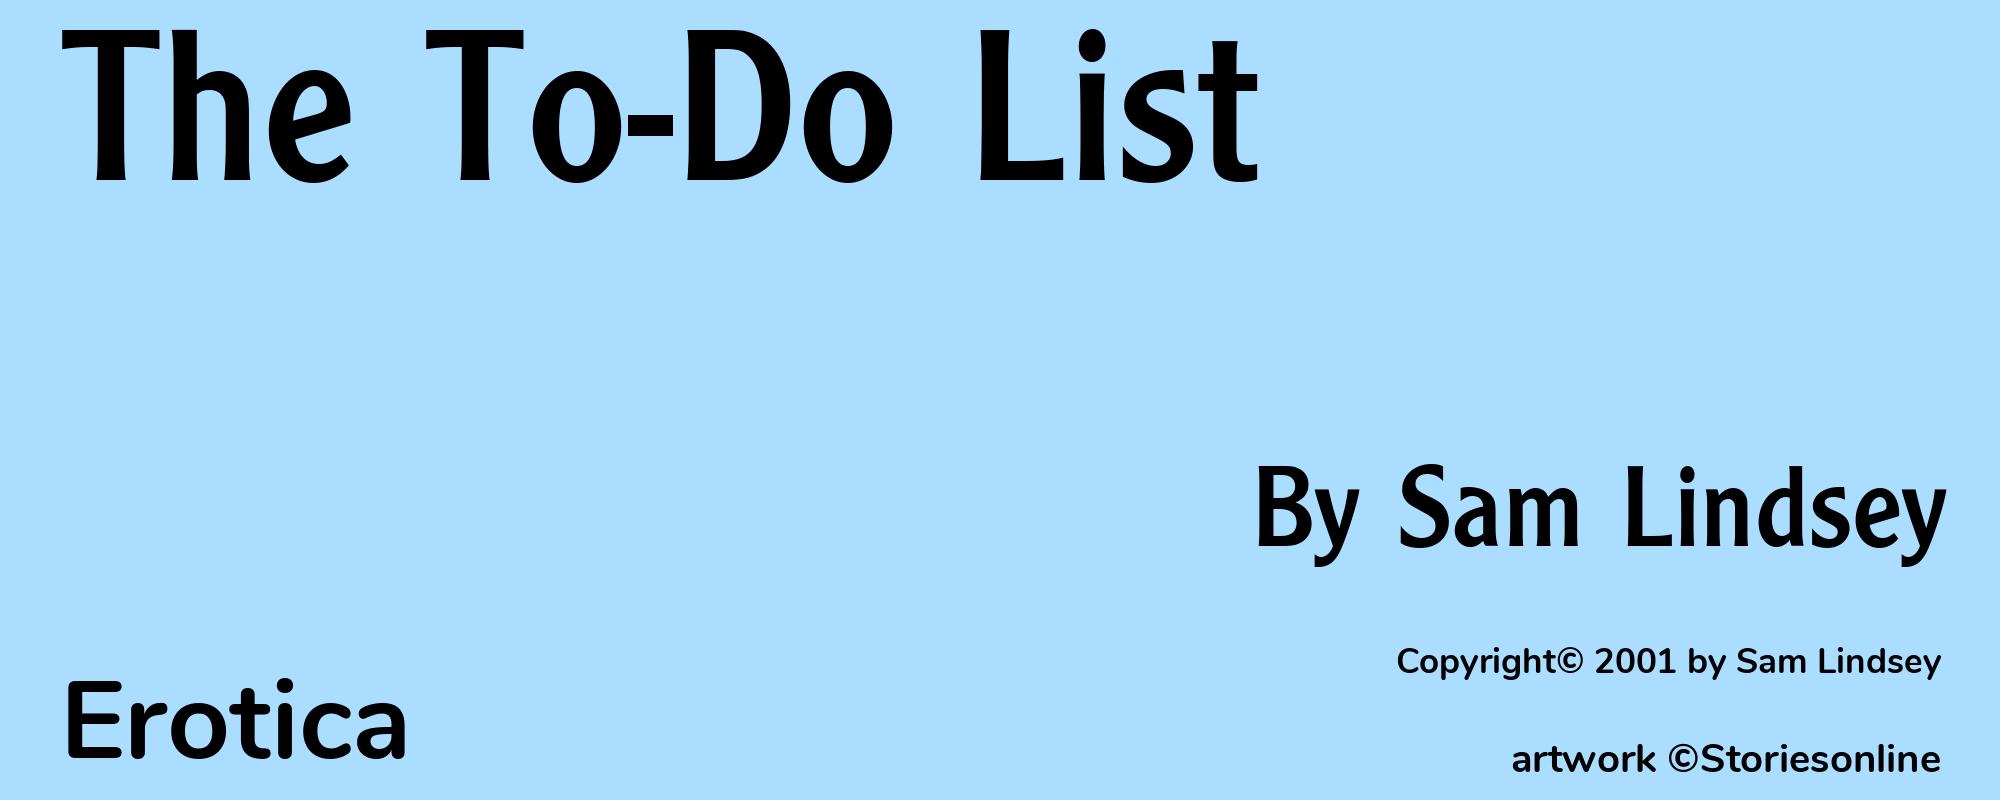 The To-Do List - Cover